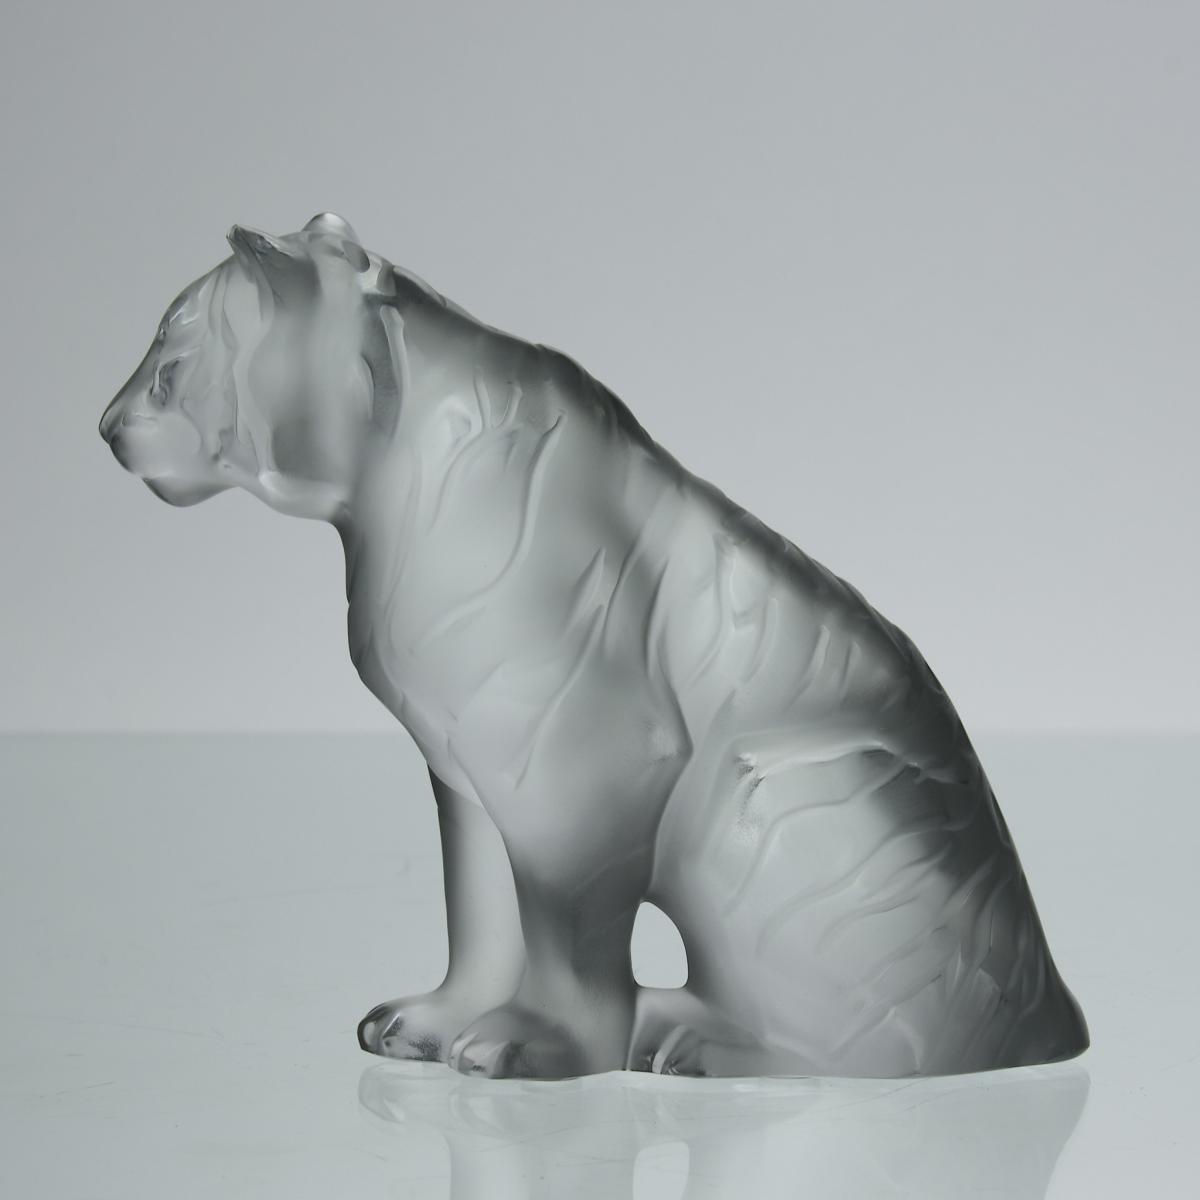 Contemporary 21st Century Sculpture entitled "Tigre Assis" by Lalique Glass